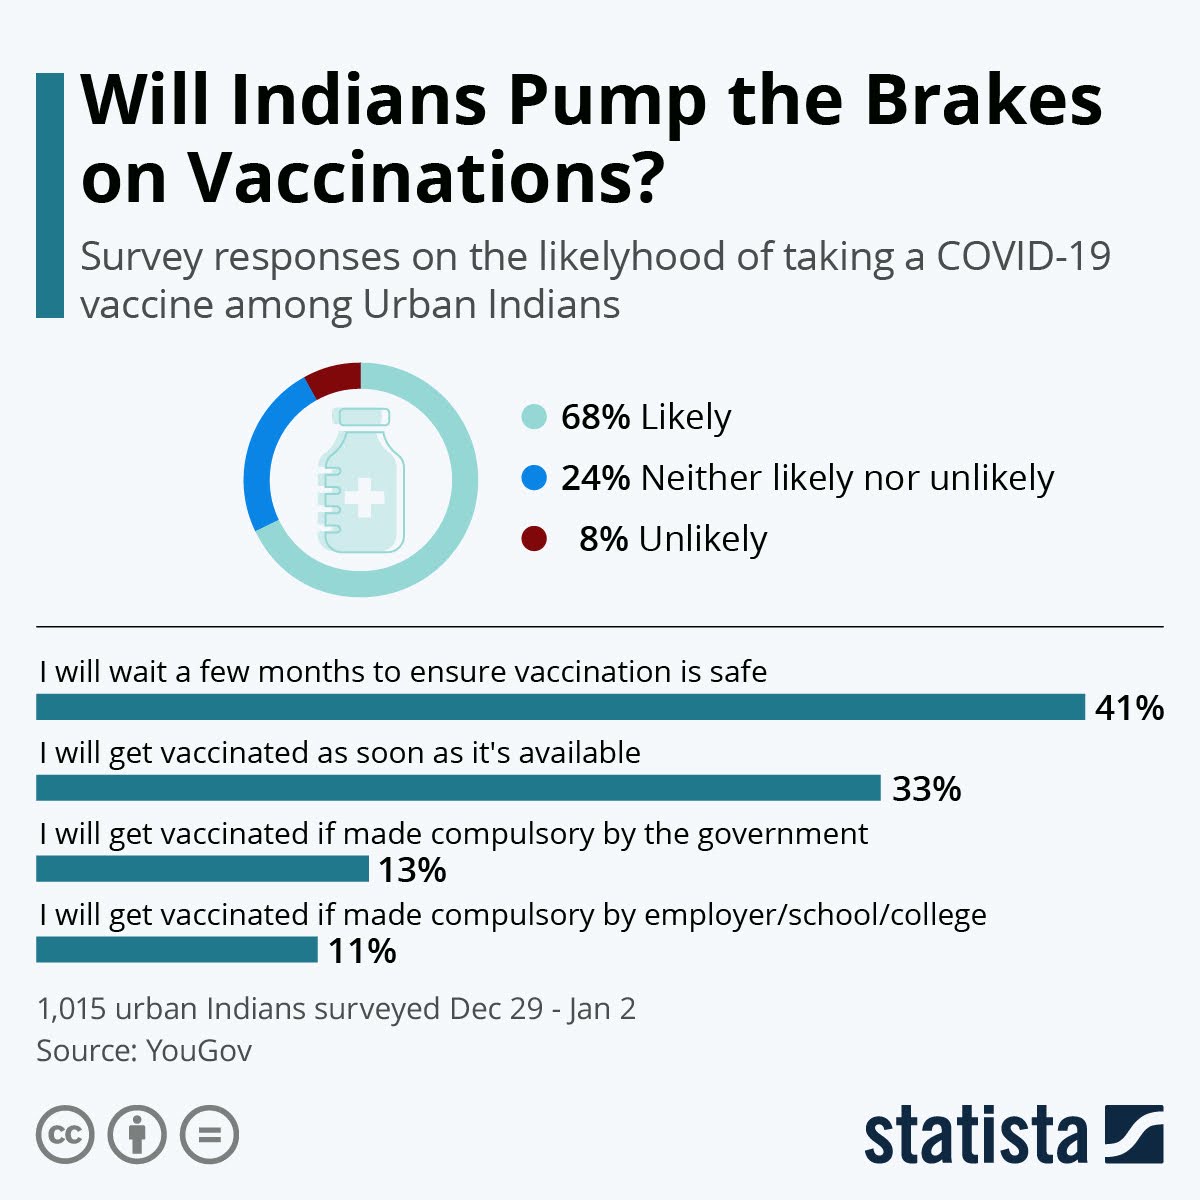 will-indians-pump-the-brakes-on-vaccinations-infographic